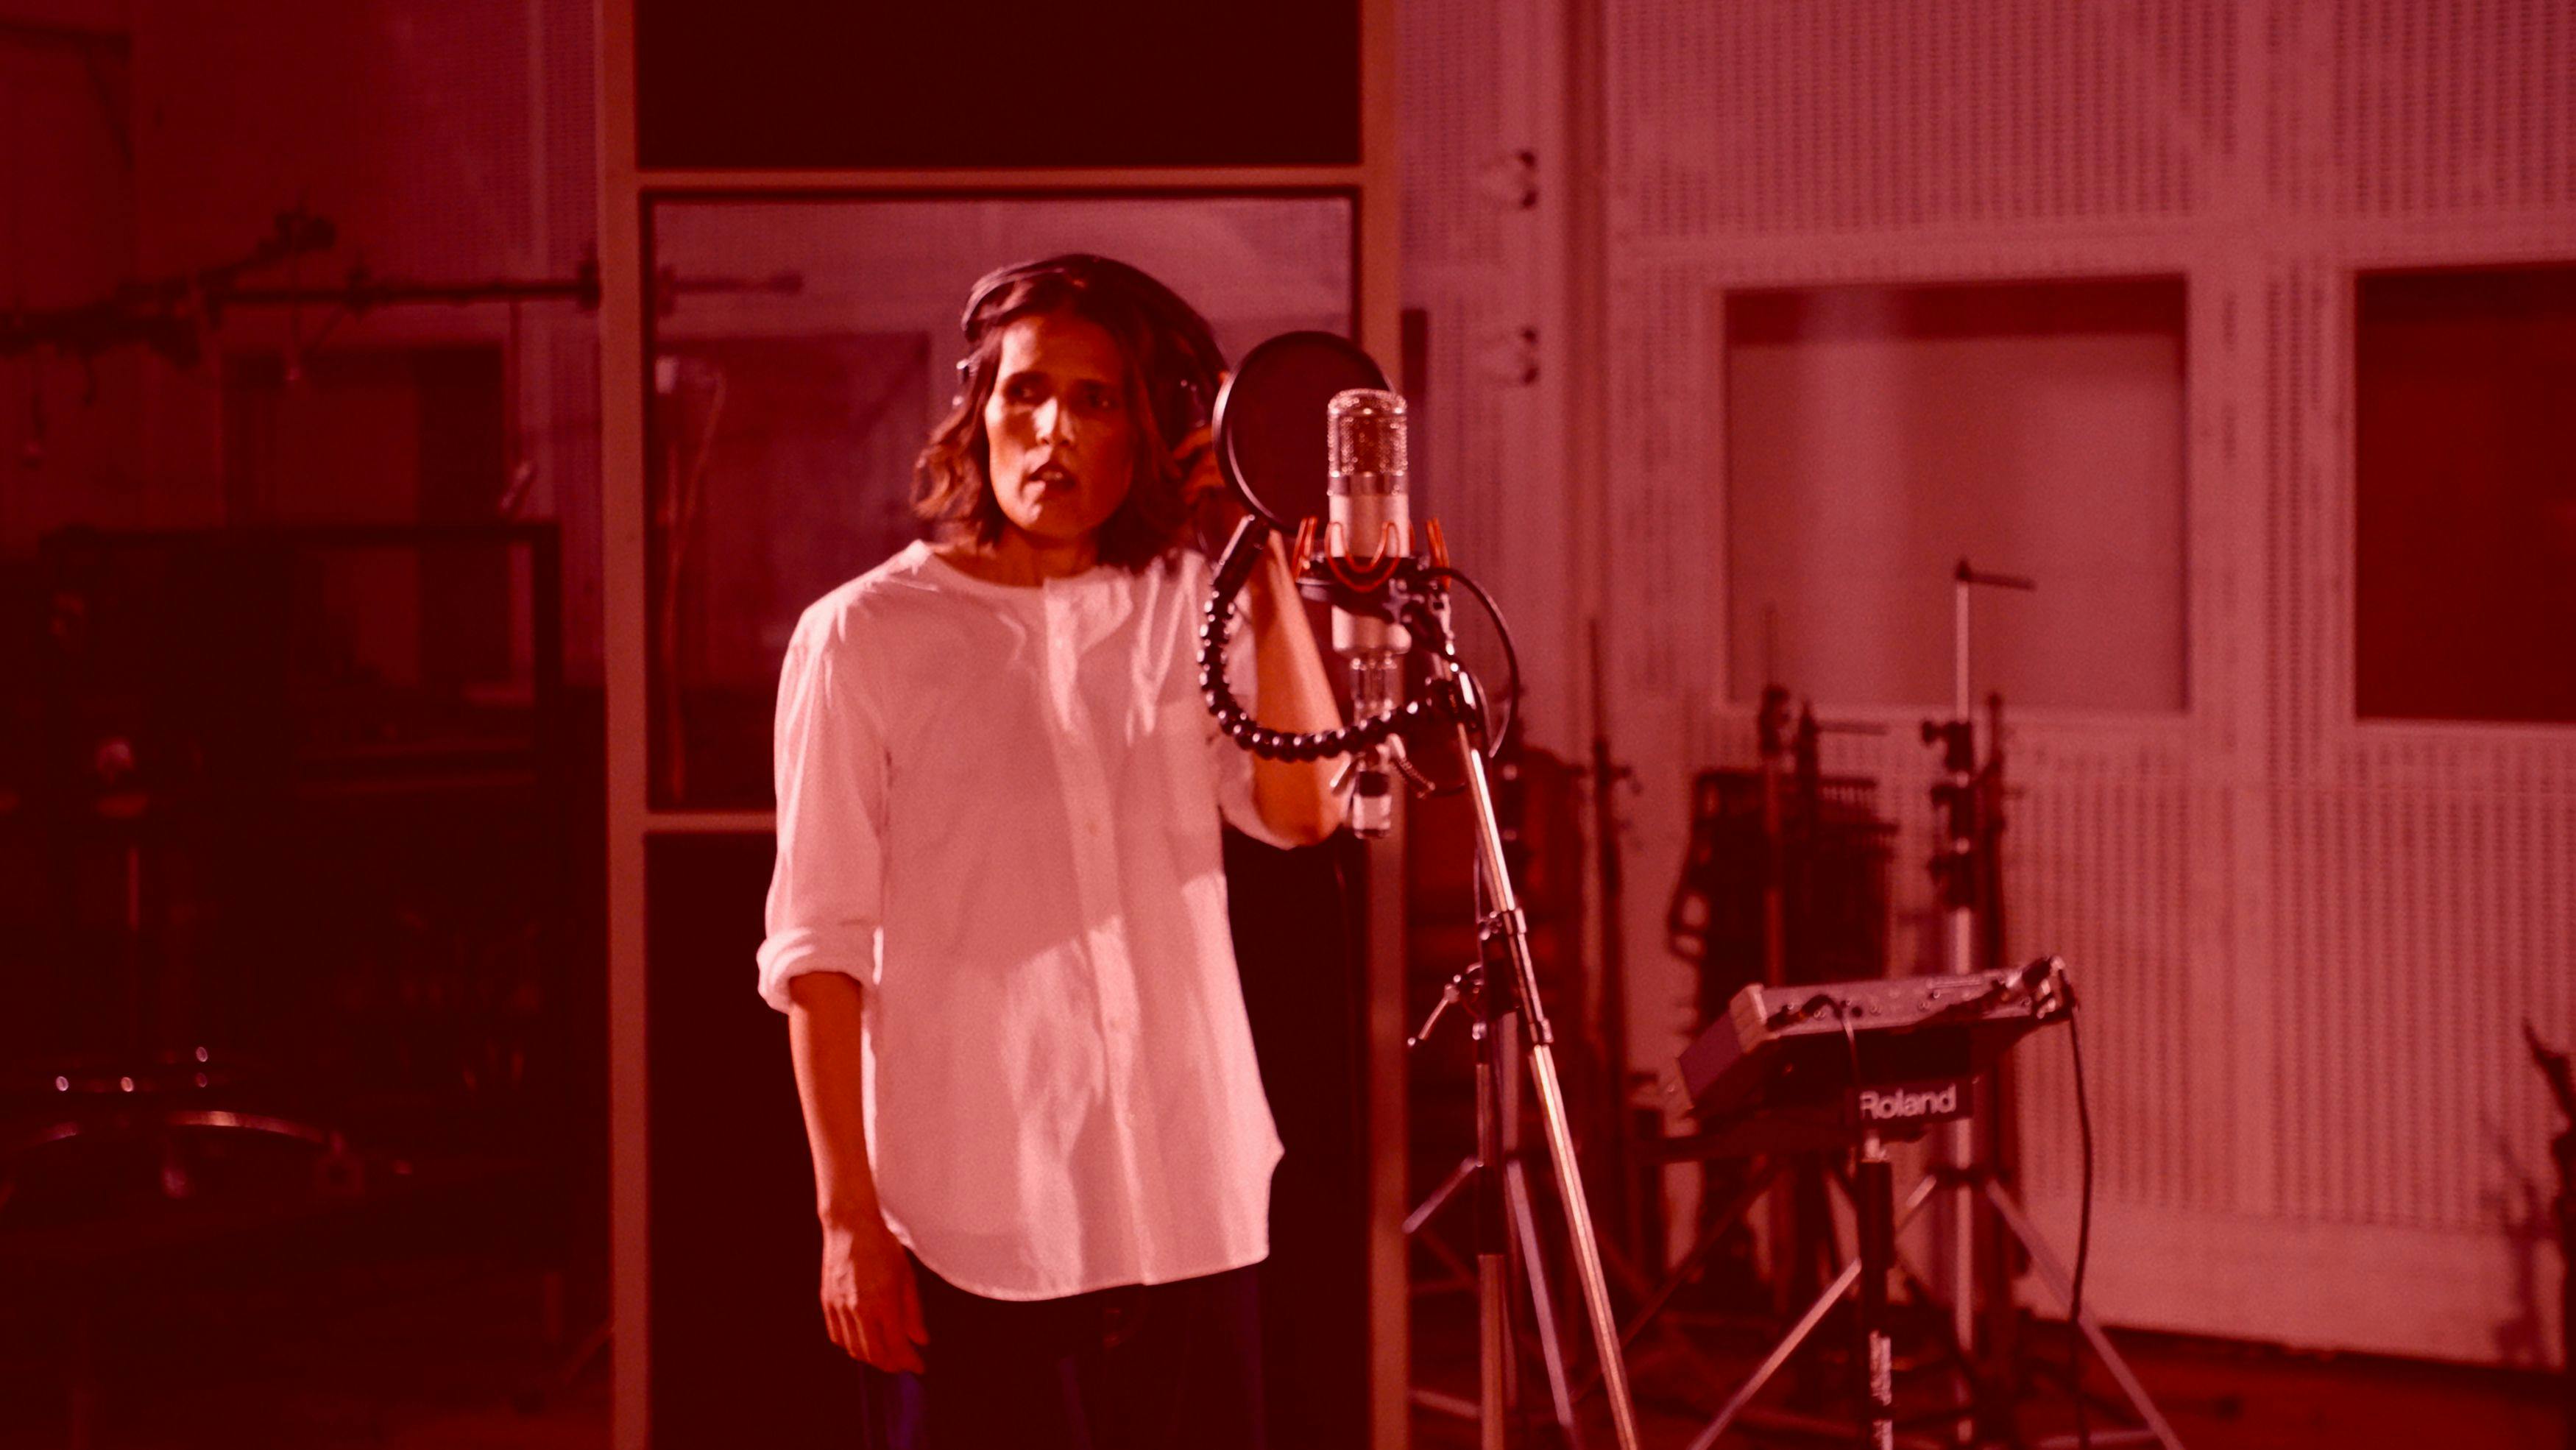 A woman wearing a white shirt is singing into a microphone in a recording studio, the image has a dark pink hue